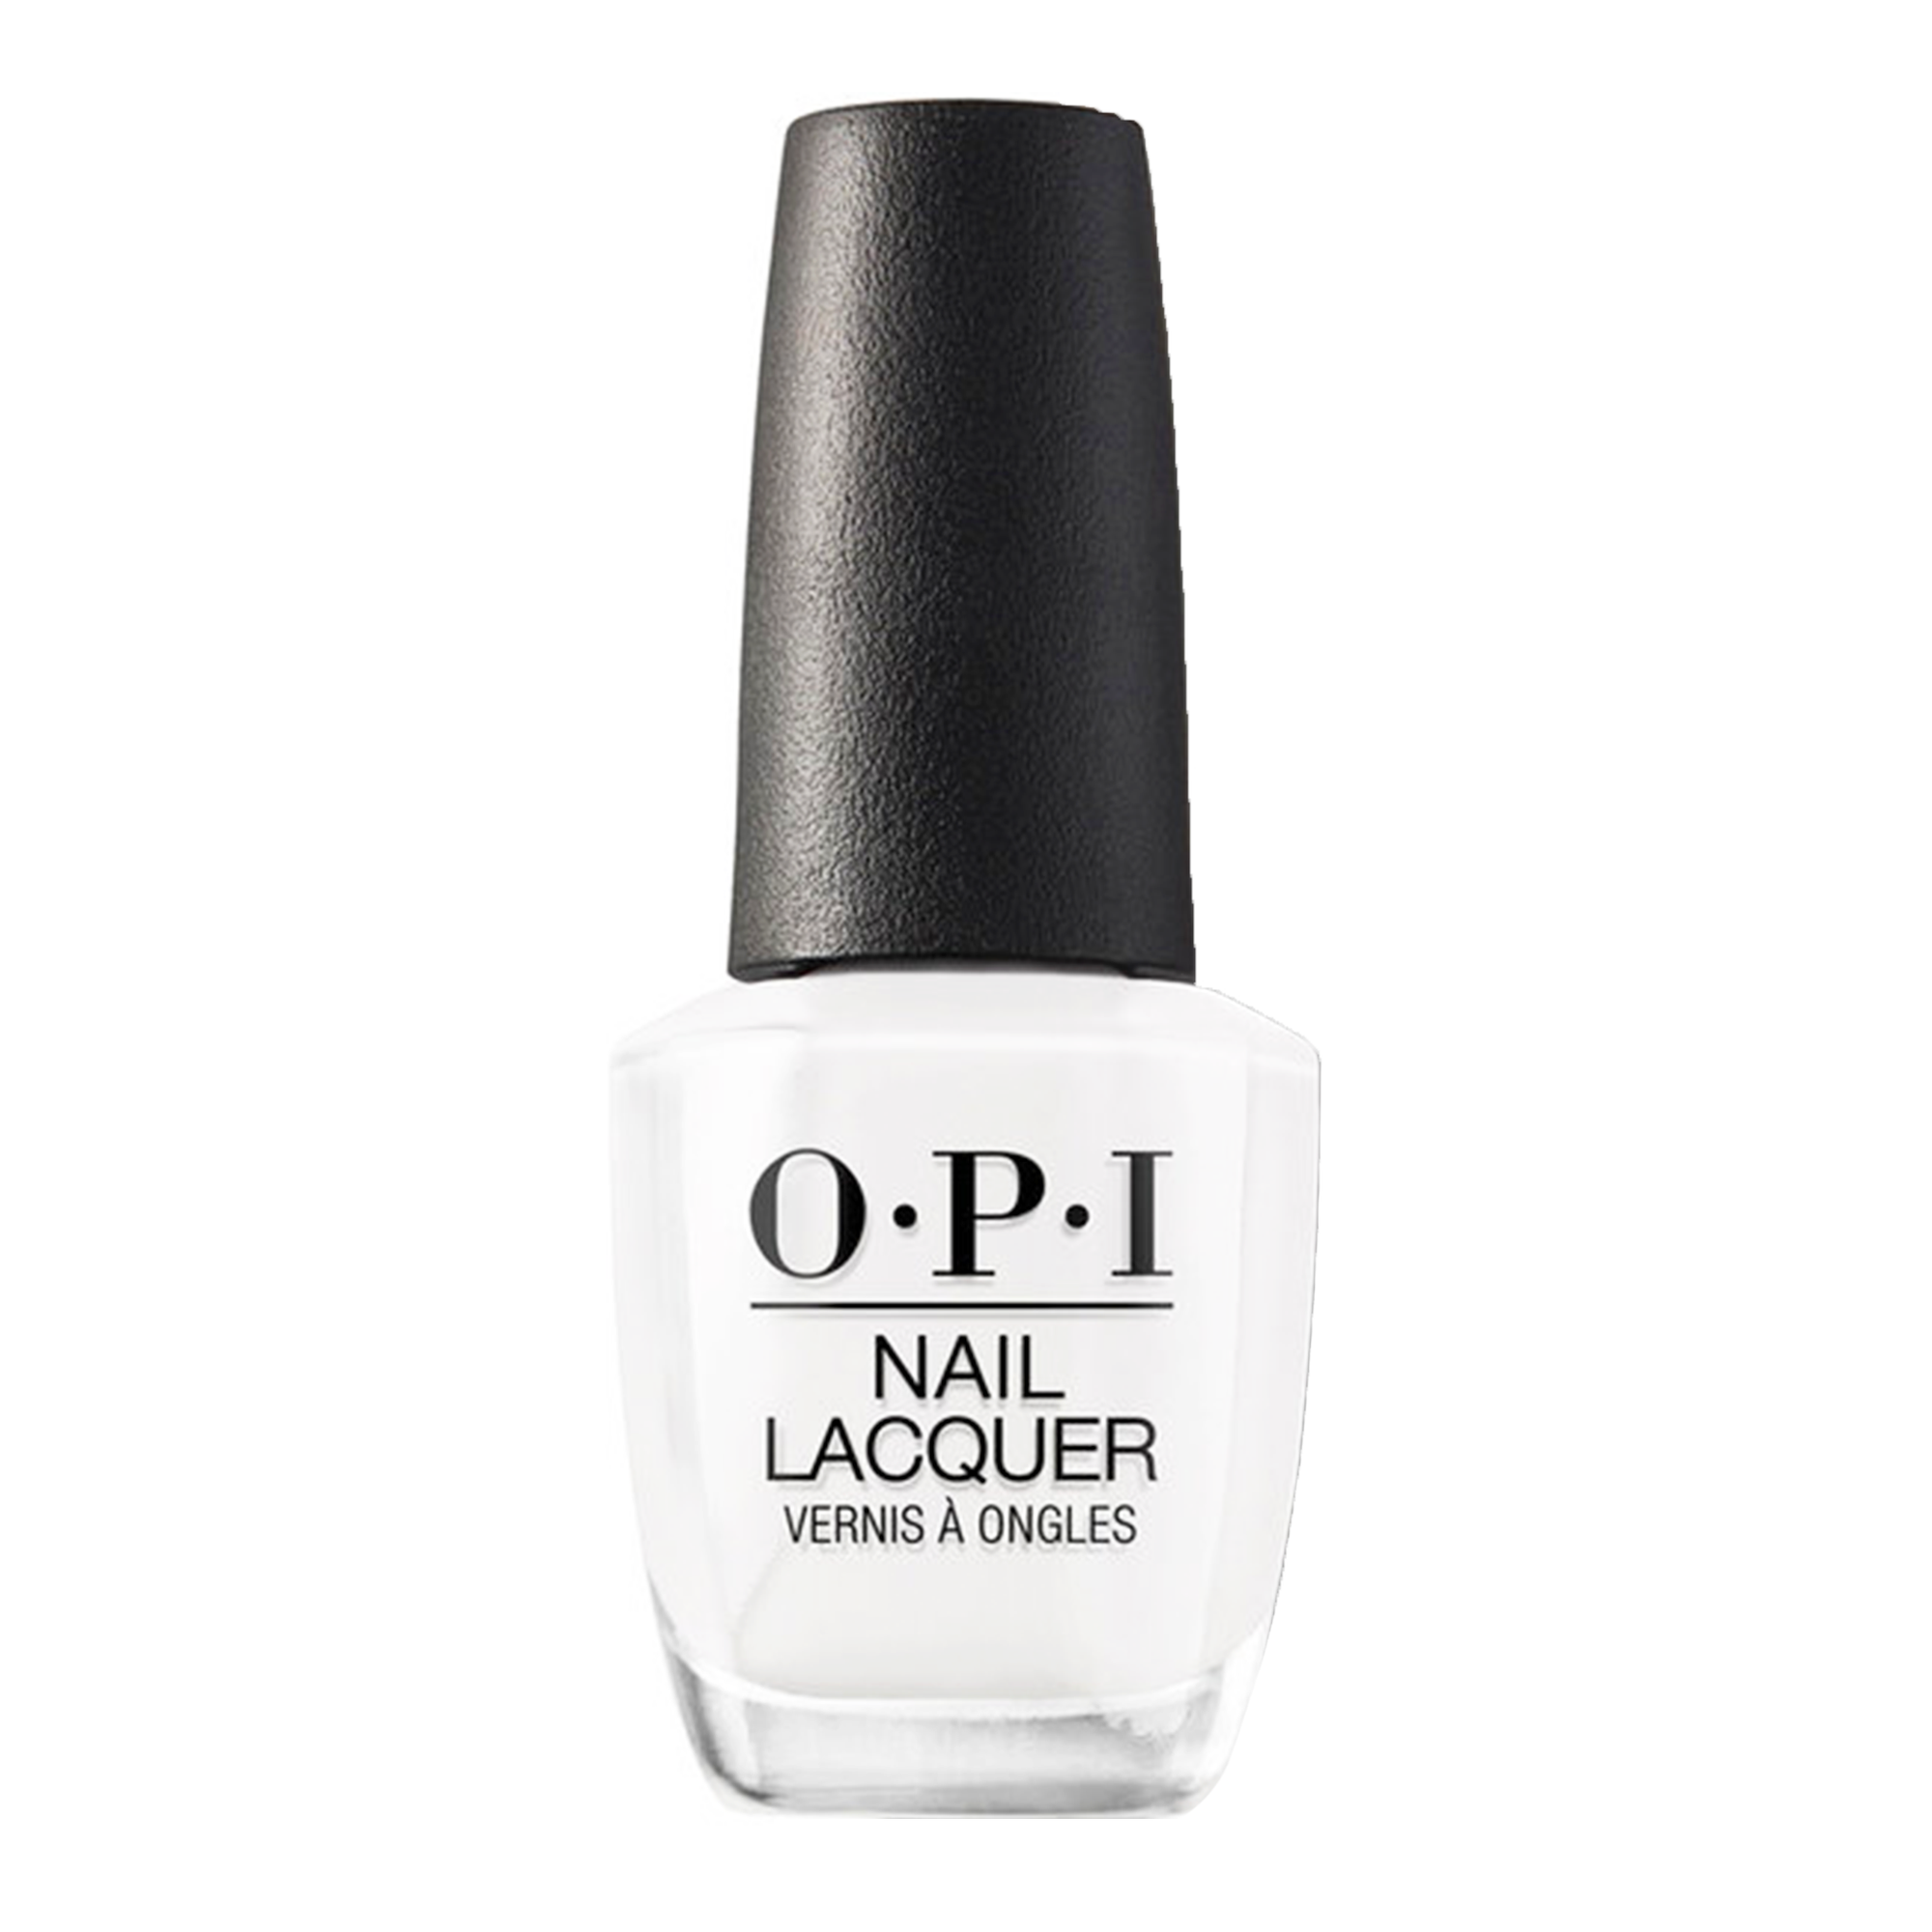 Village Wellness Spa - OPI Nail Lacquer Alpine Snow - Full Size 15ml